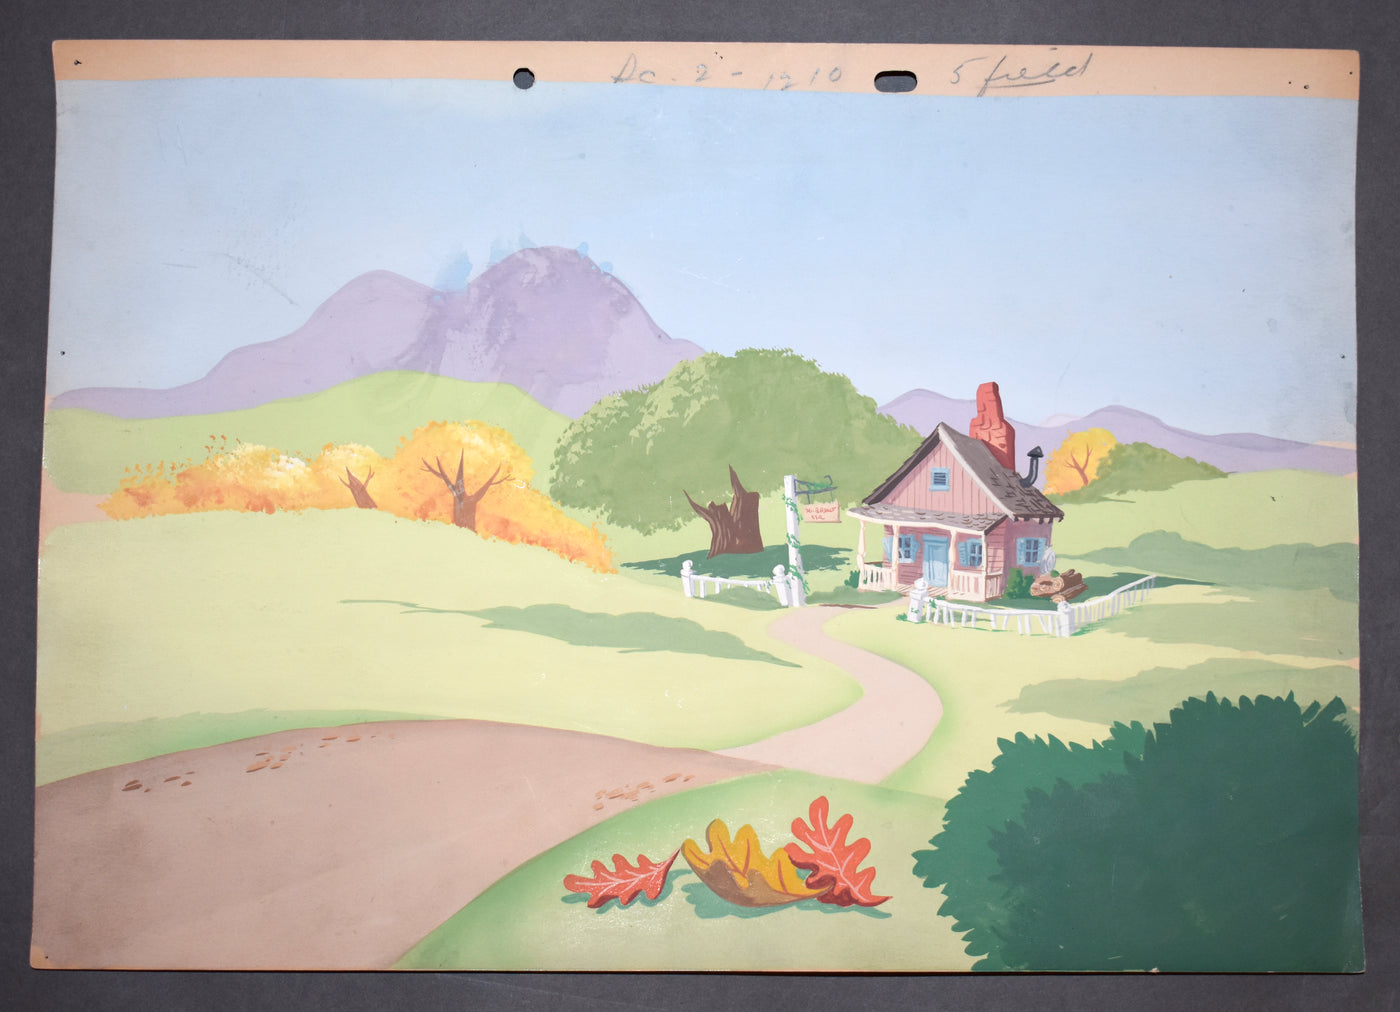 Original Warner Brothers Production Background from The Turn-Tale Wolf (1952)